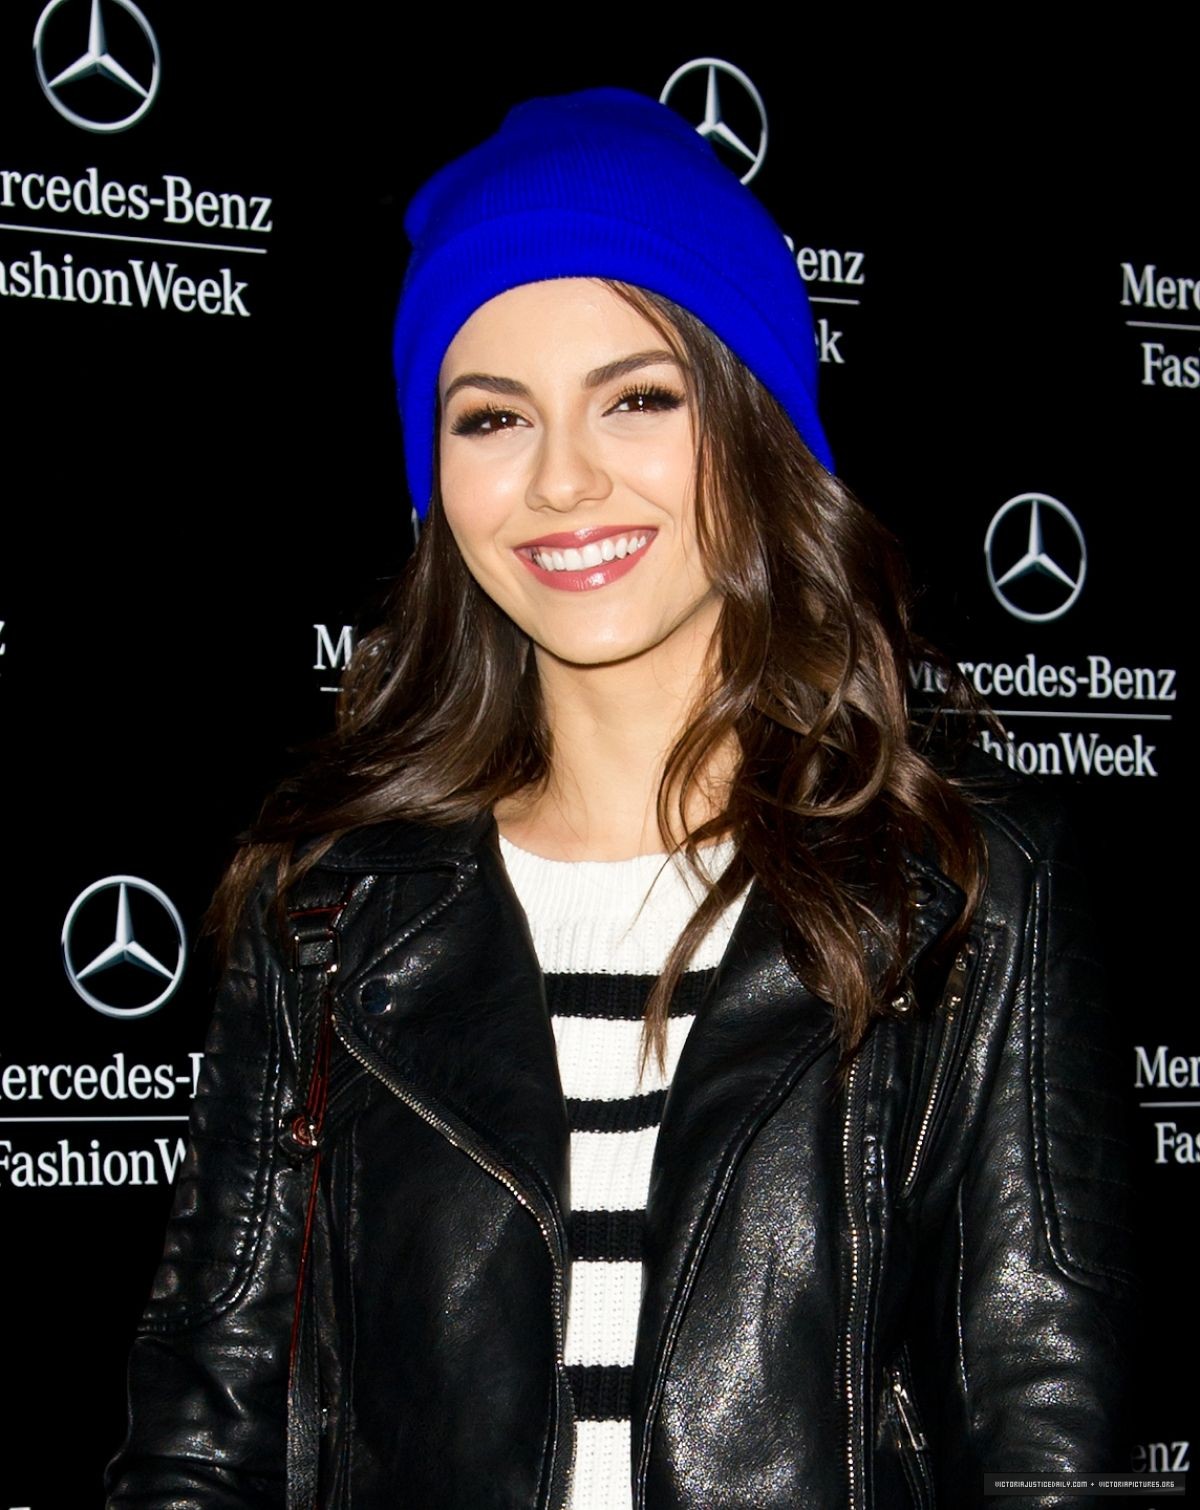 https://rouzegar.com/wp-content/uploads/2014/09/victoria-justice-at-fall-2014-mercedes-benz-fashion-week-in-new-york_1.jpg